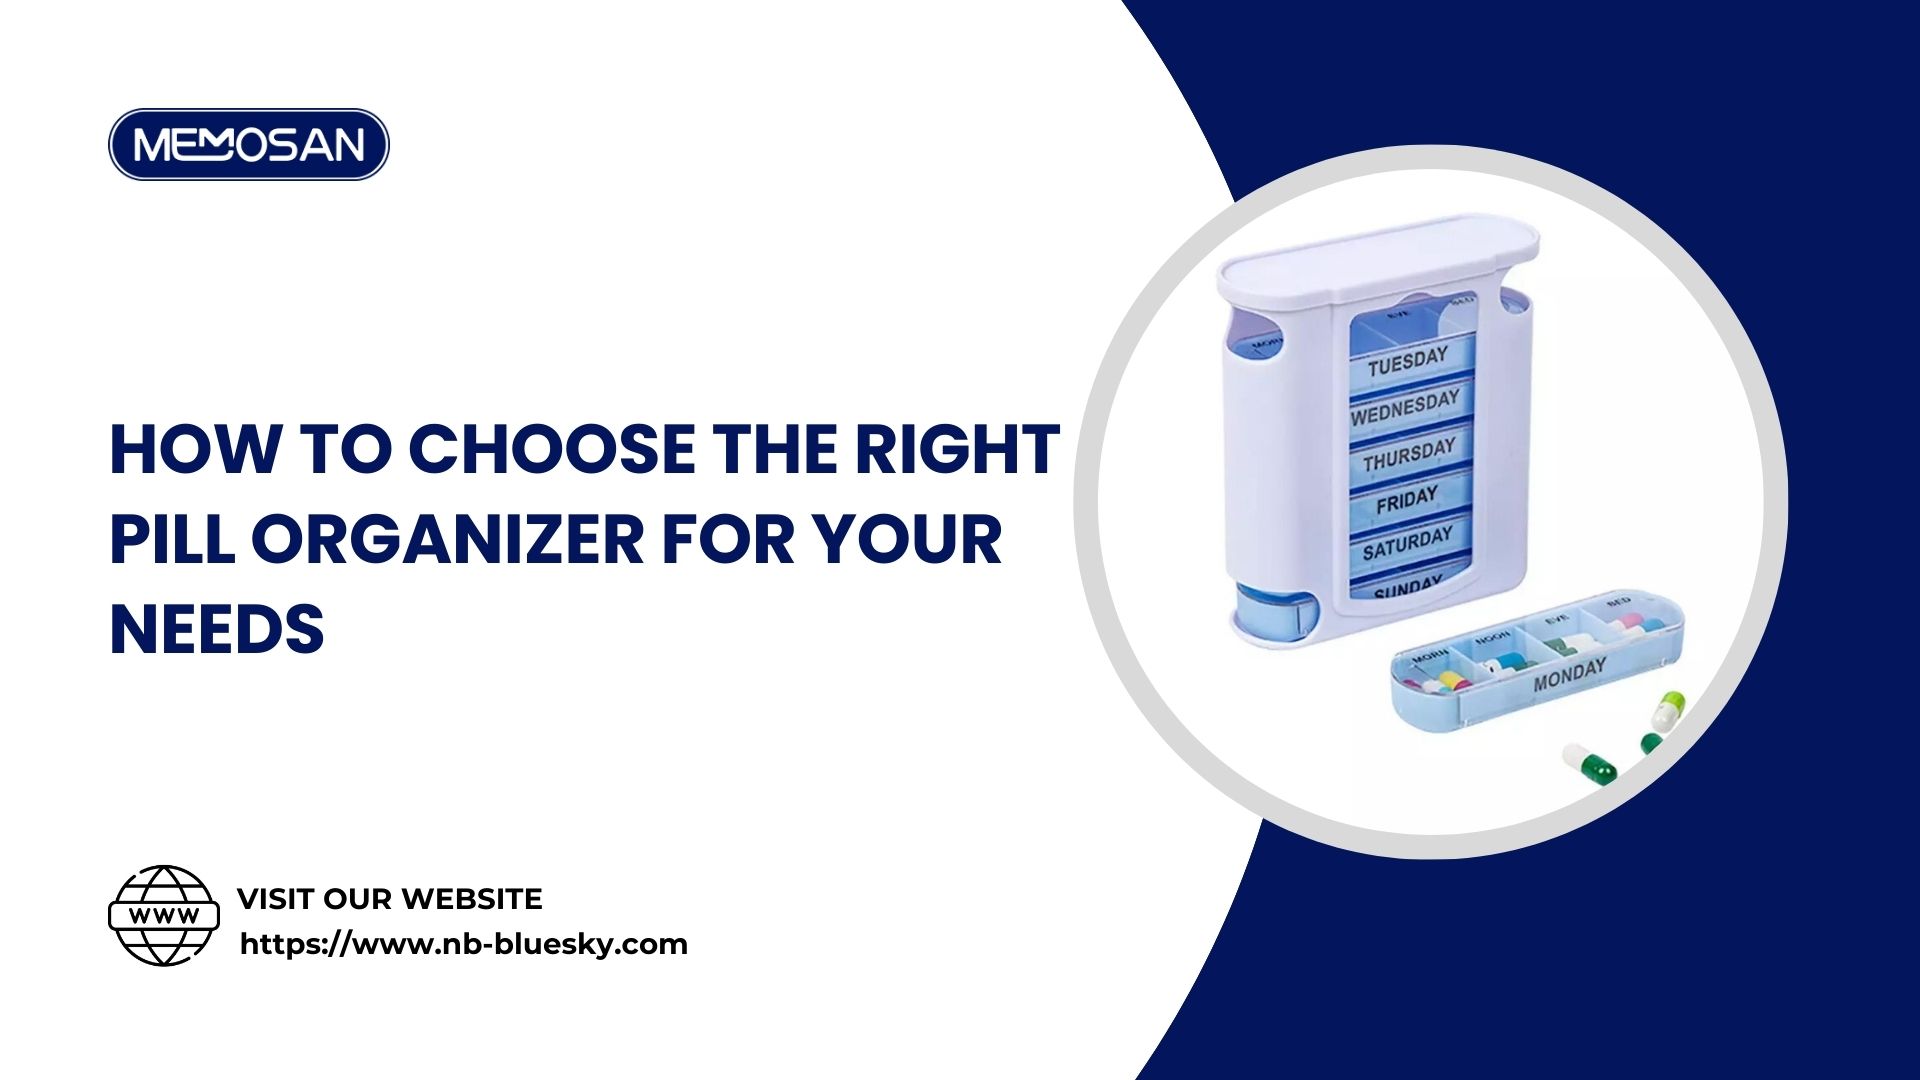 How to Choose the Right Pill Organizer for Your Needs